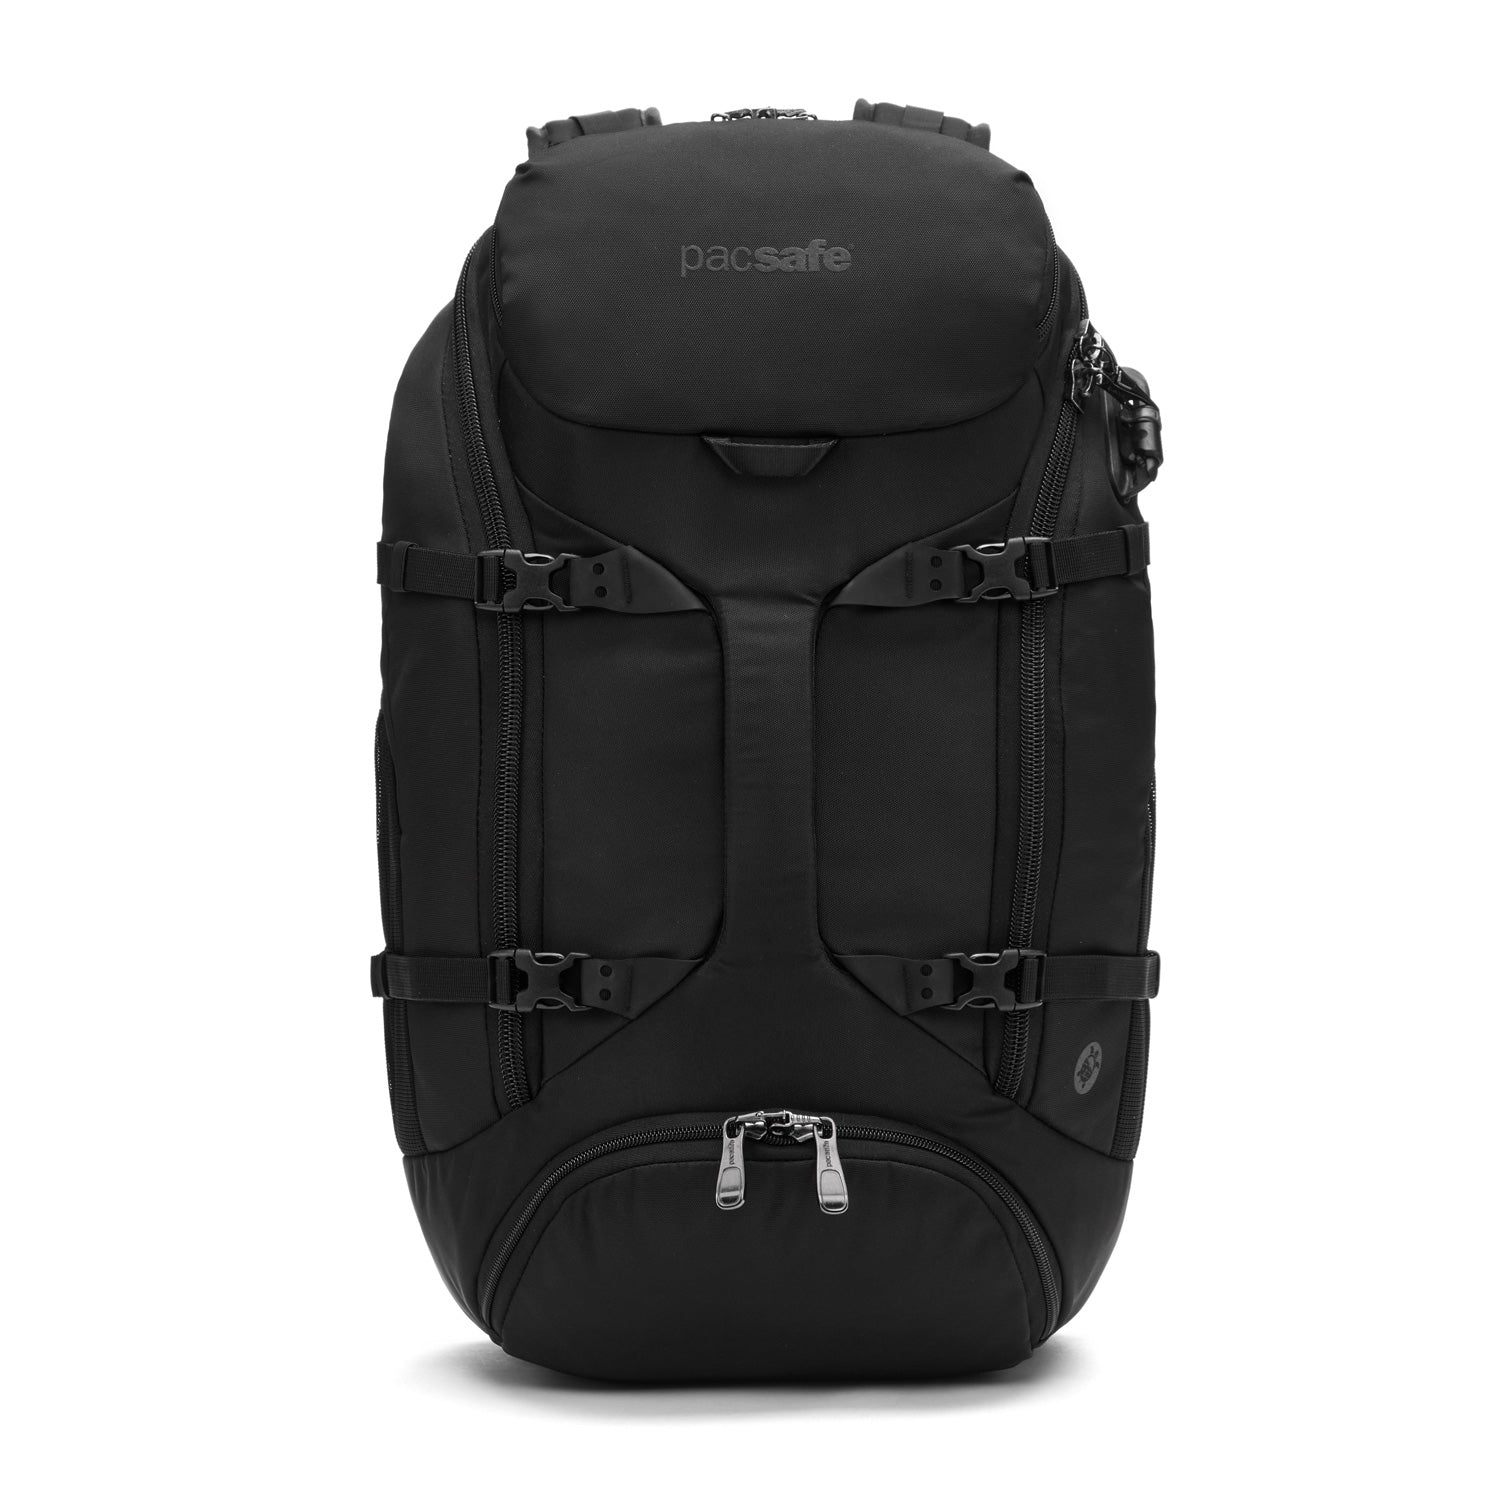 Large 35 litre anti-theft backpack, 15.6 inch laptop